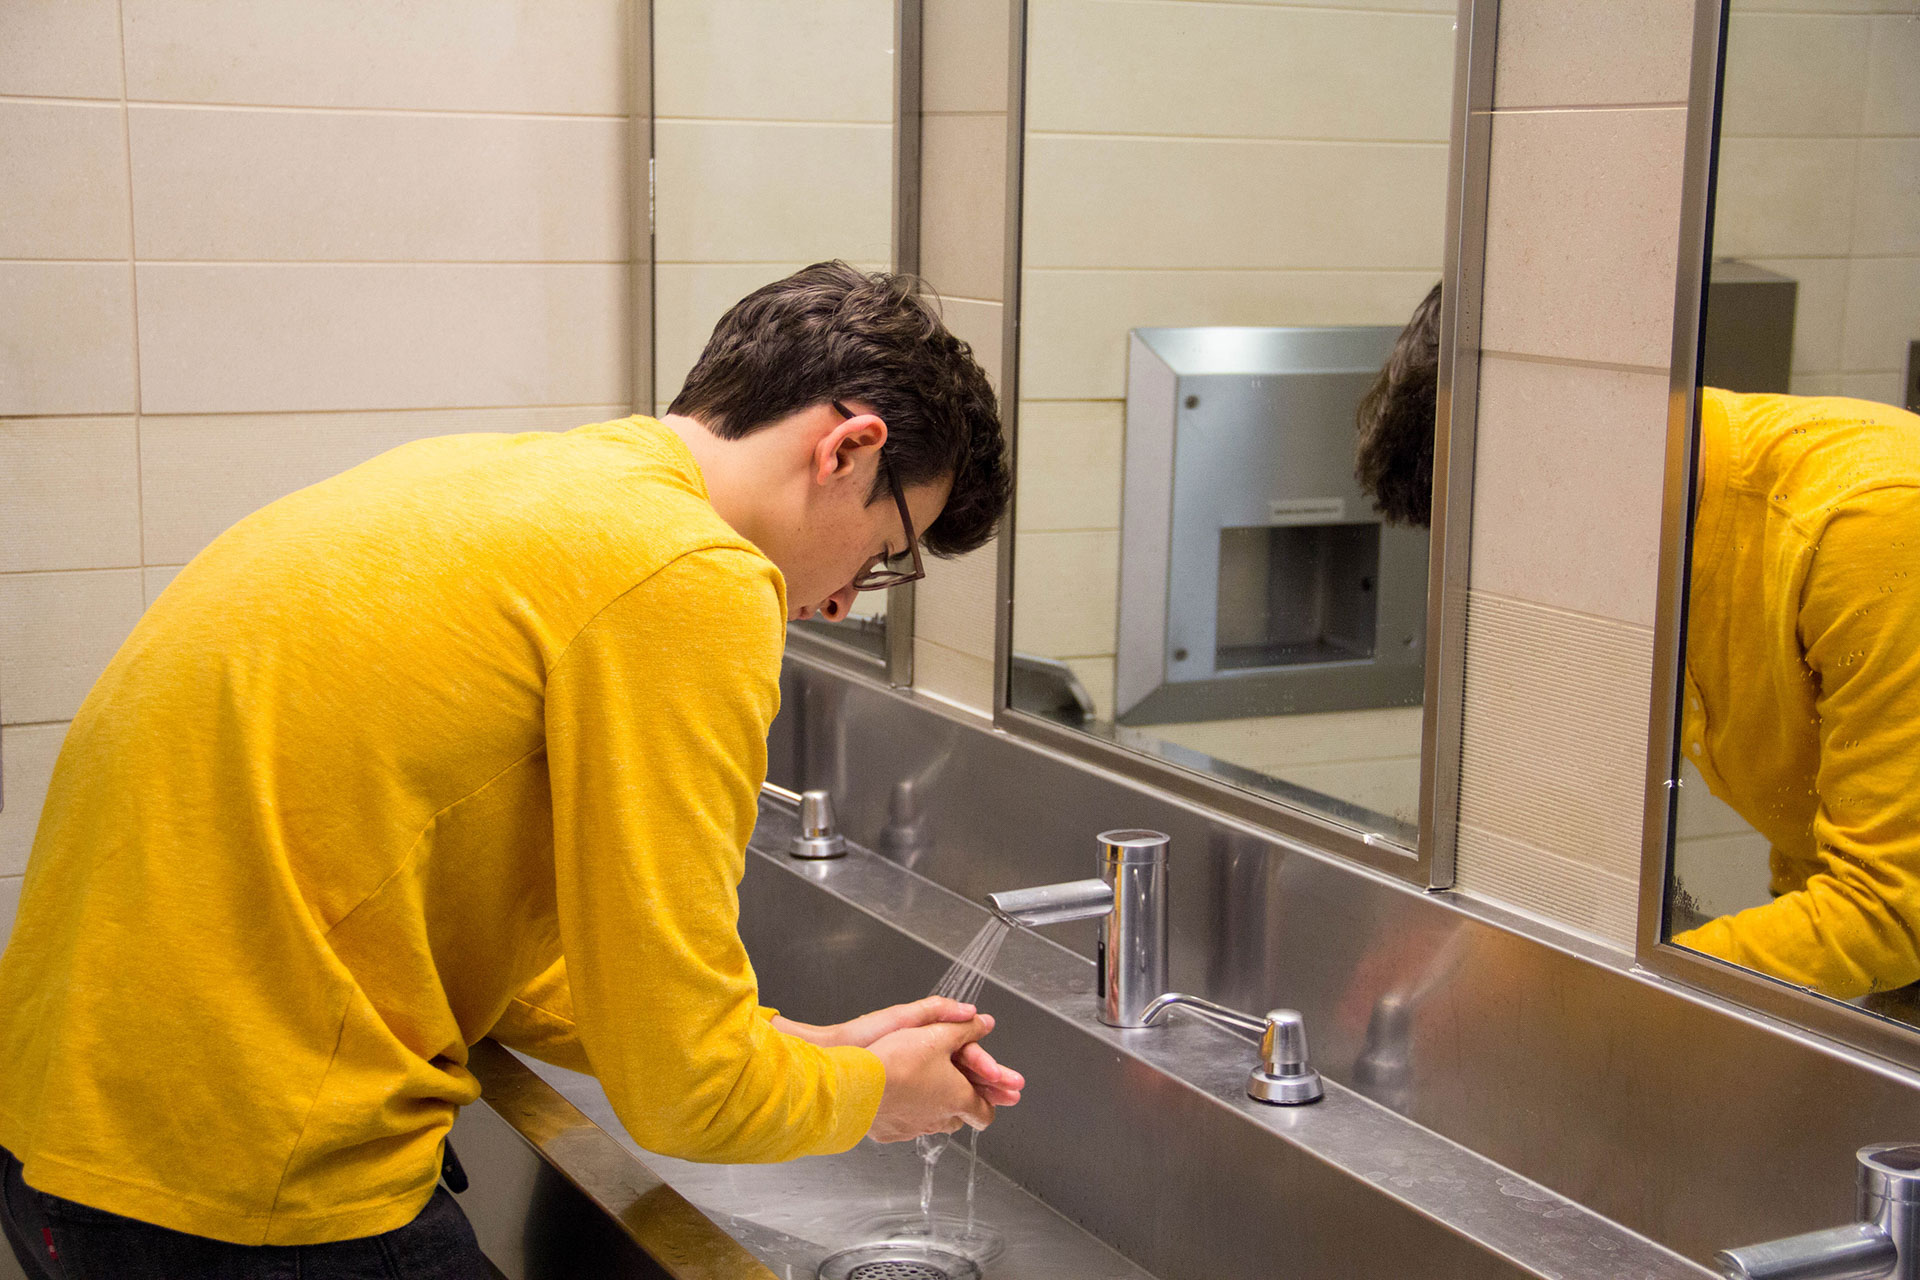 A man washing his hands